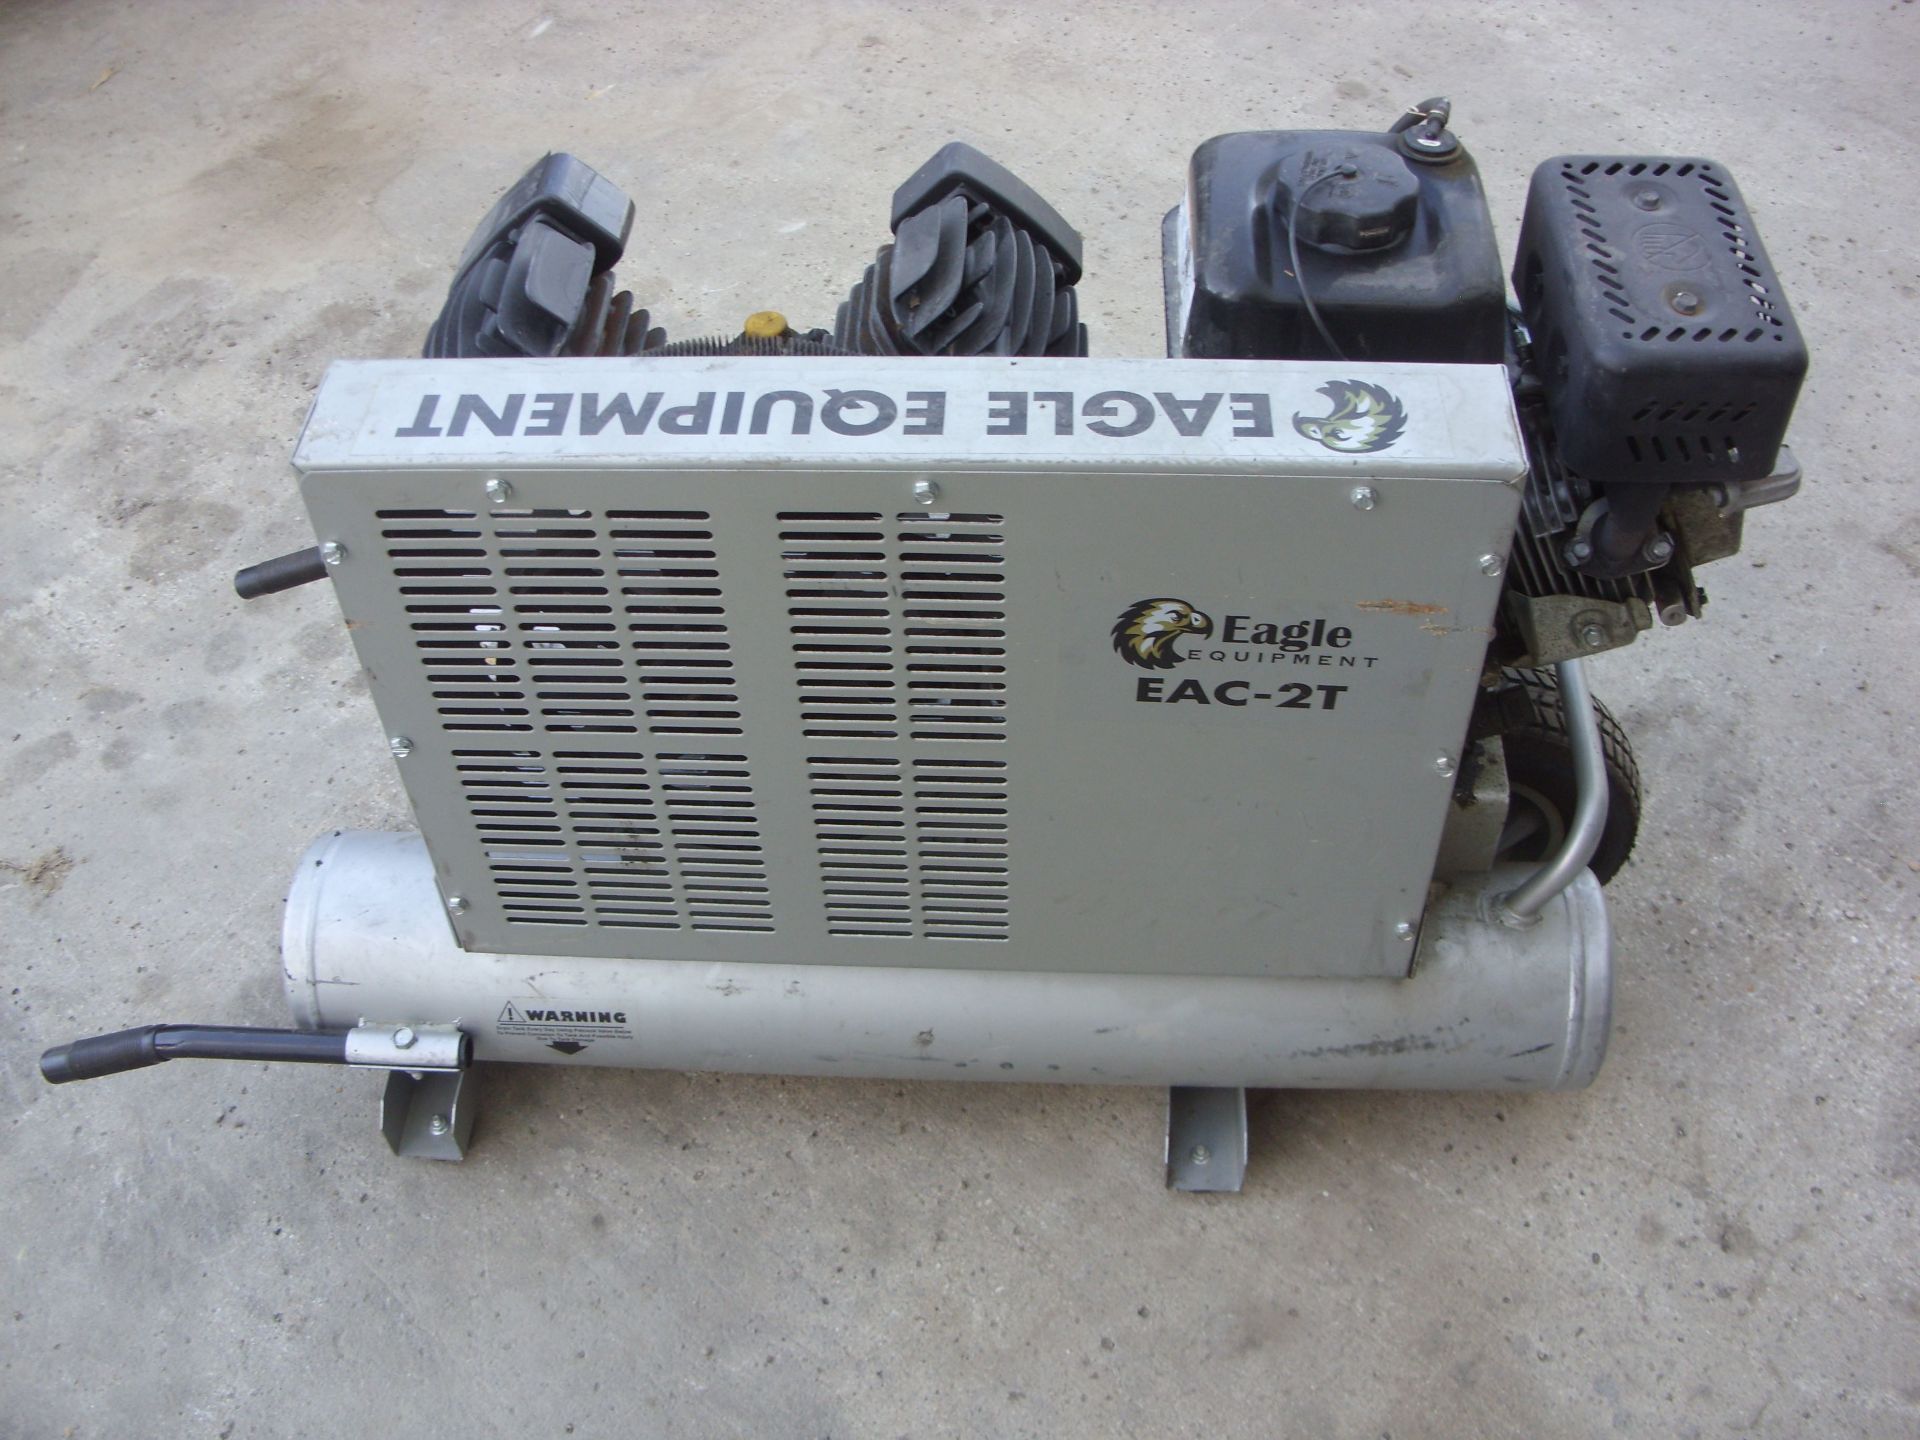 Eagle Equipment EAC-2T 208cc 8-gal gas-powered air compressor - Image 2 of 2